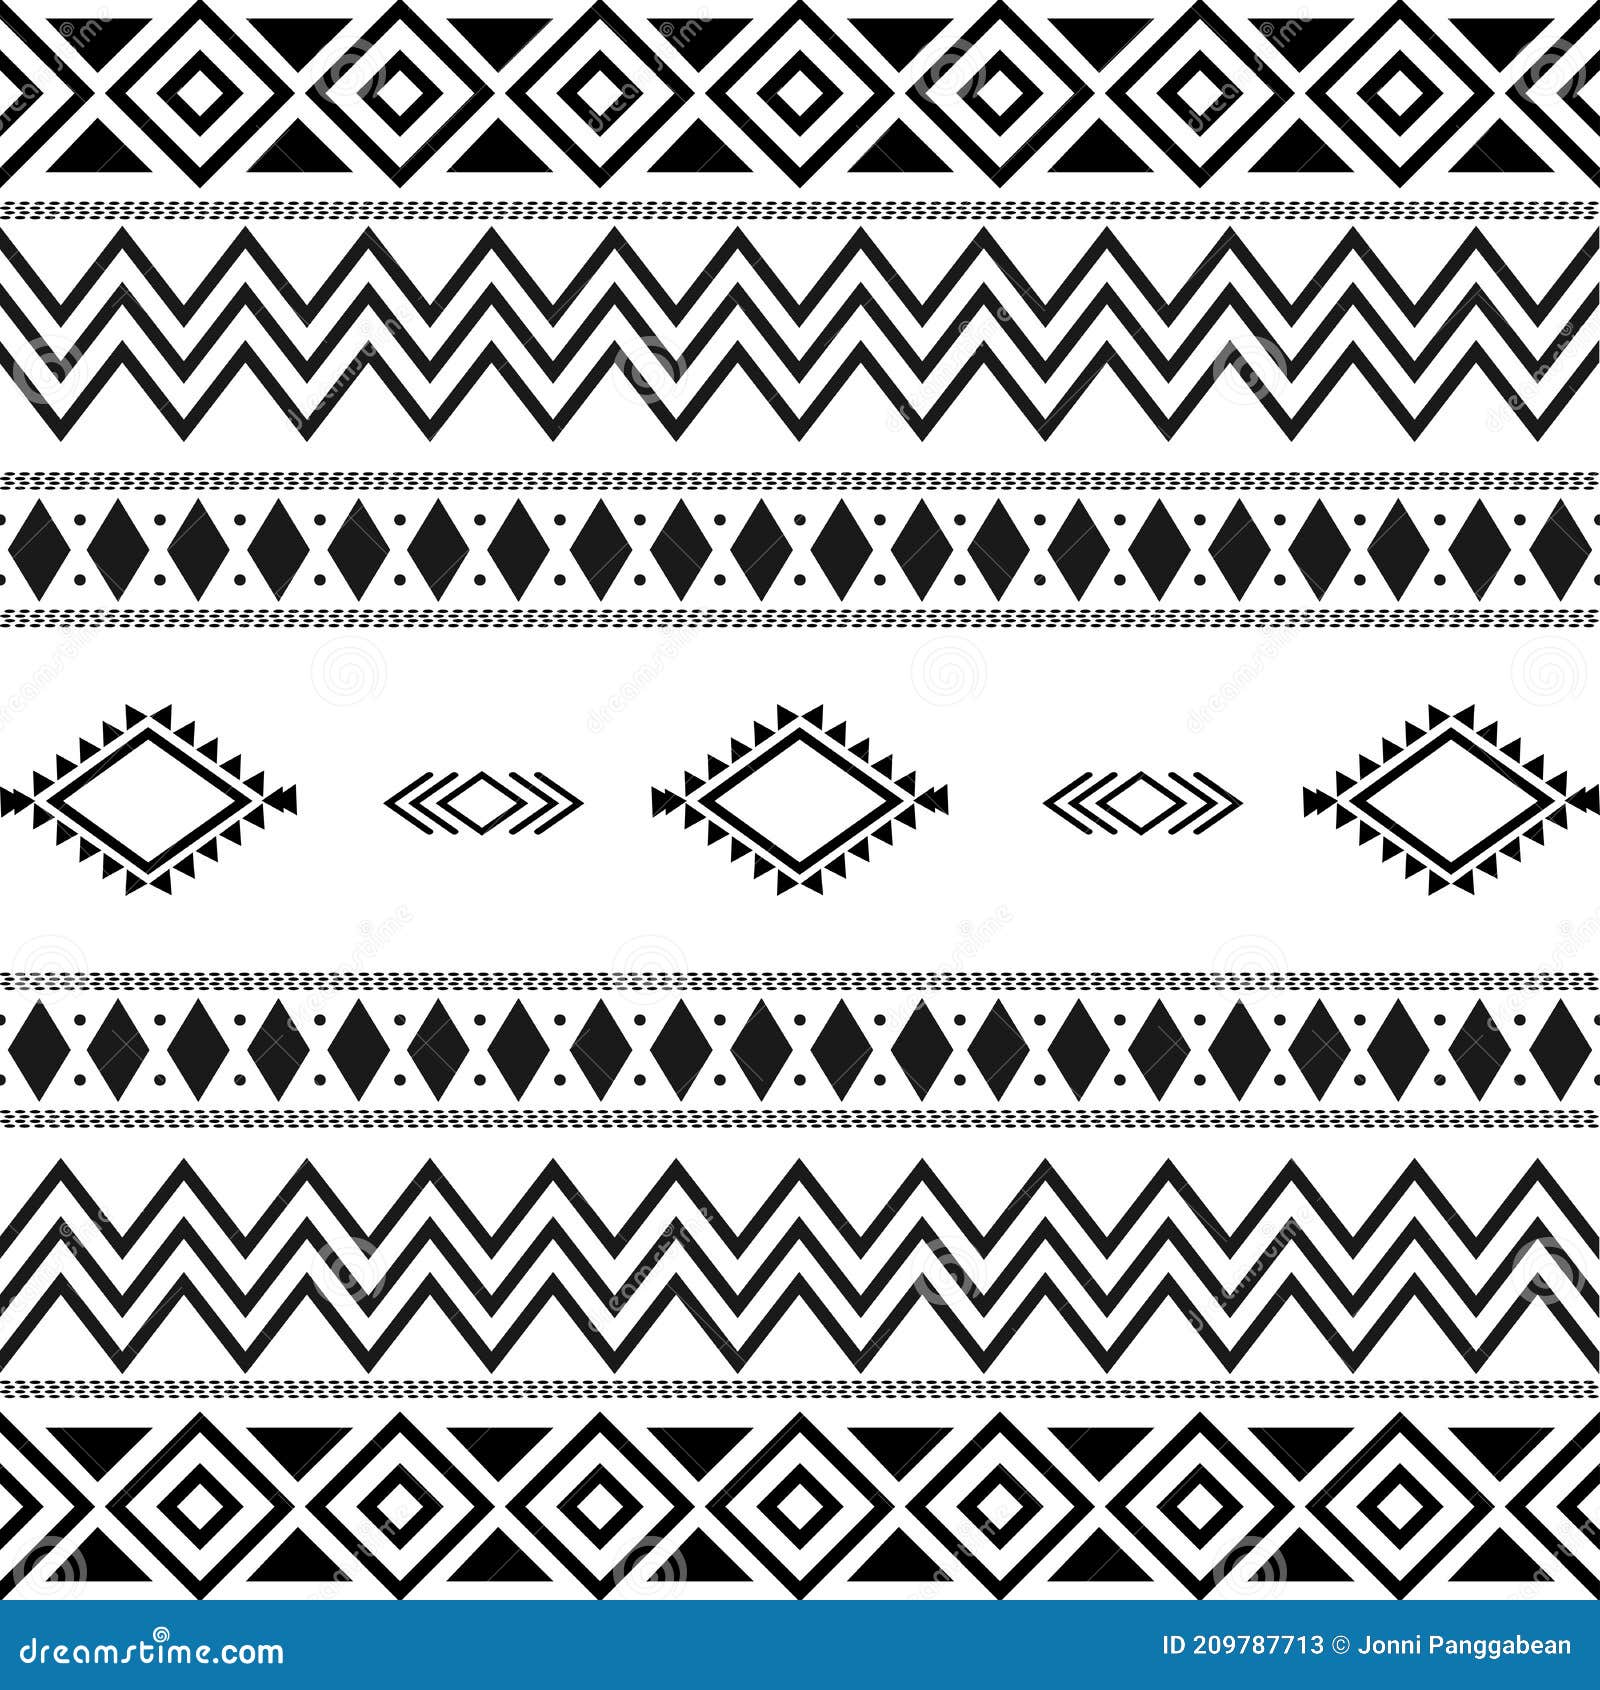 Black and White Tribal Ethnic Pattern with Geometric Elements ...